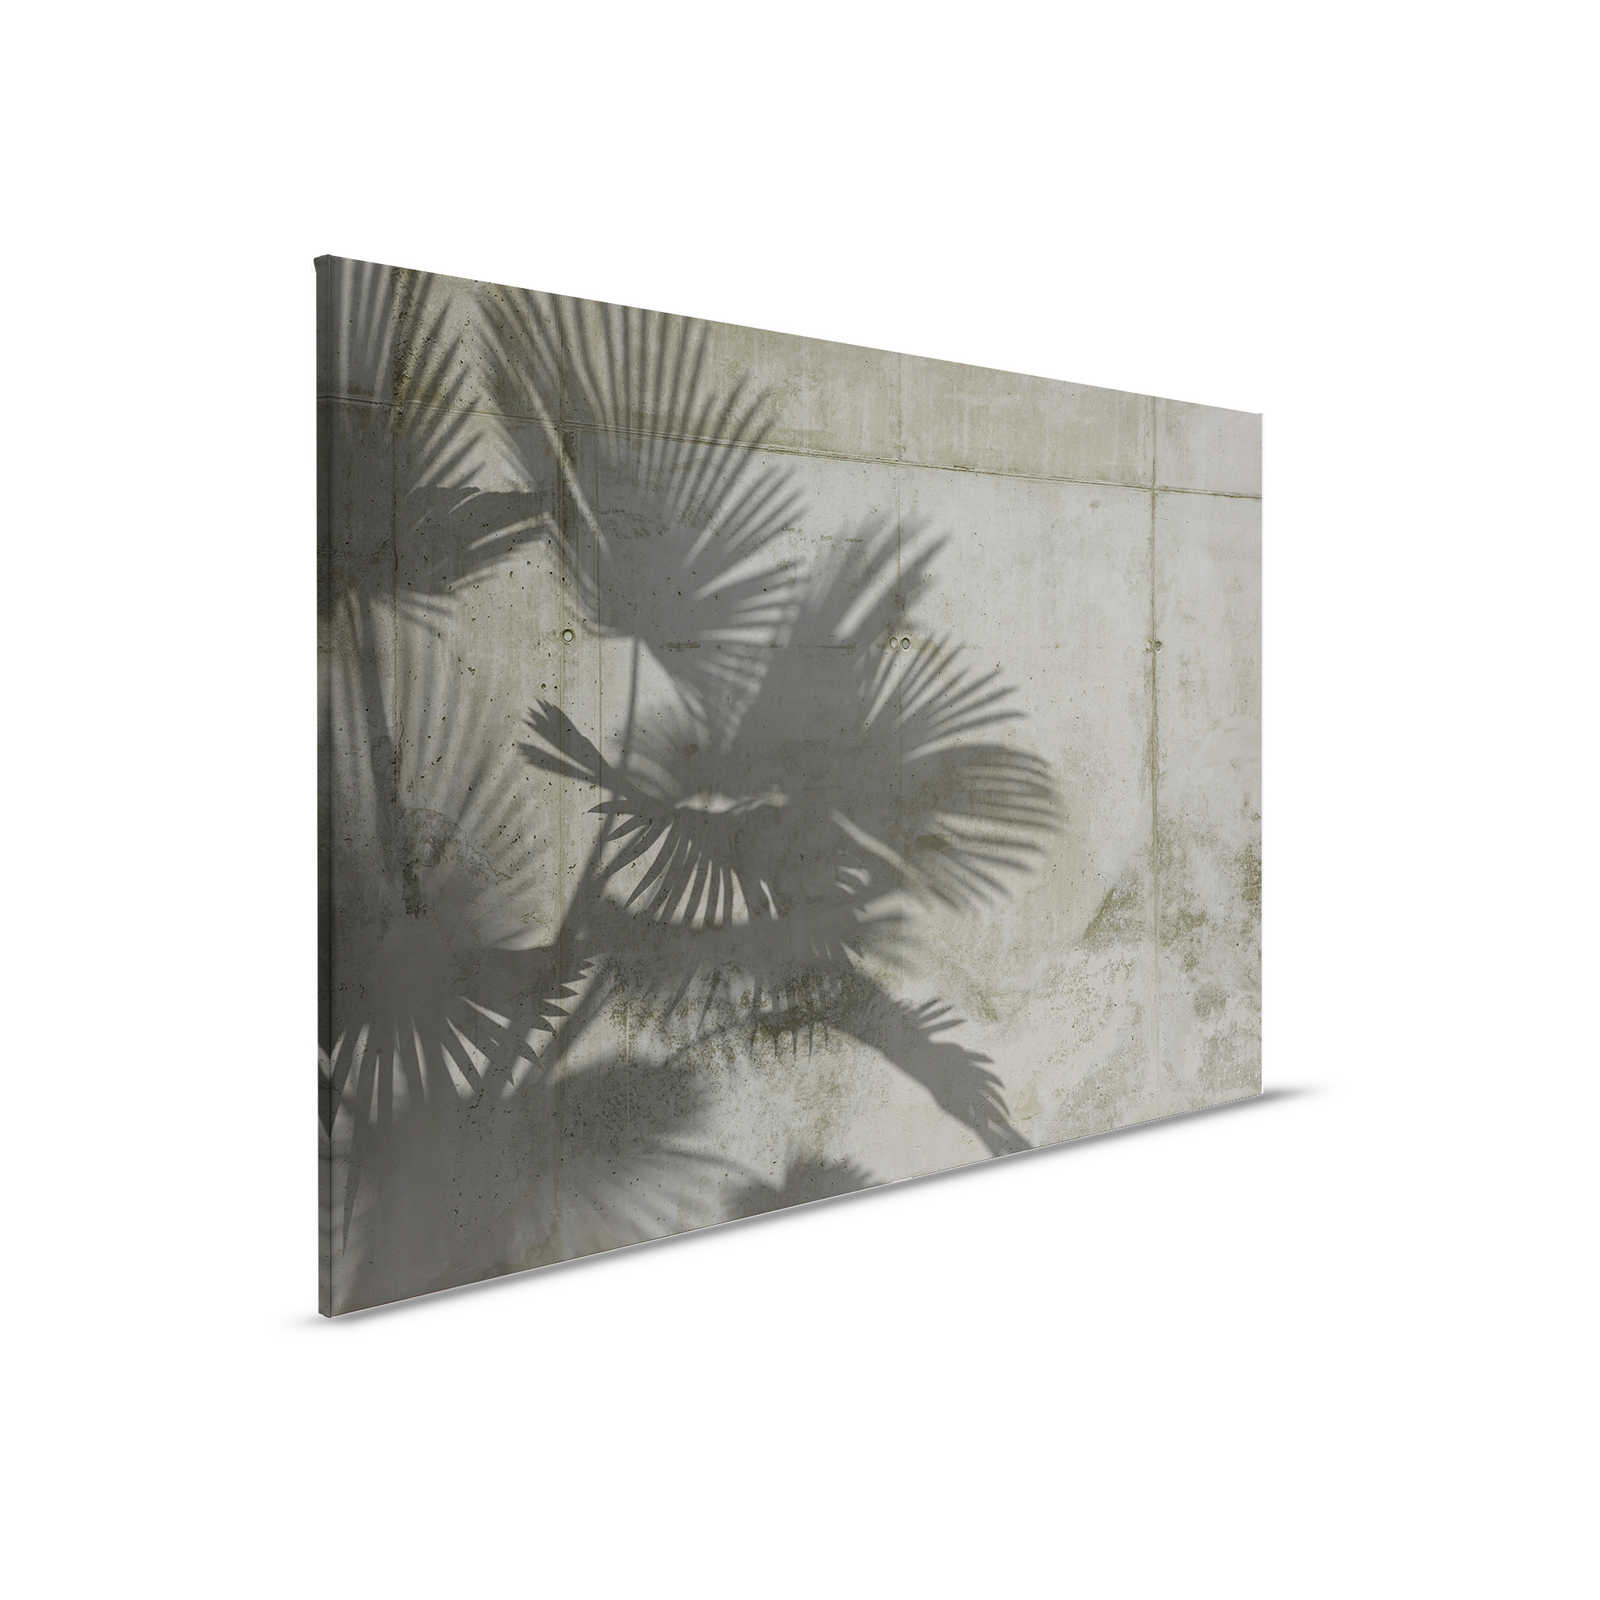         Canvas painting Shadows of palm leaves on concrete wall - 0,90 m x 0,60 m
    